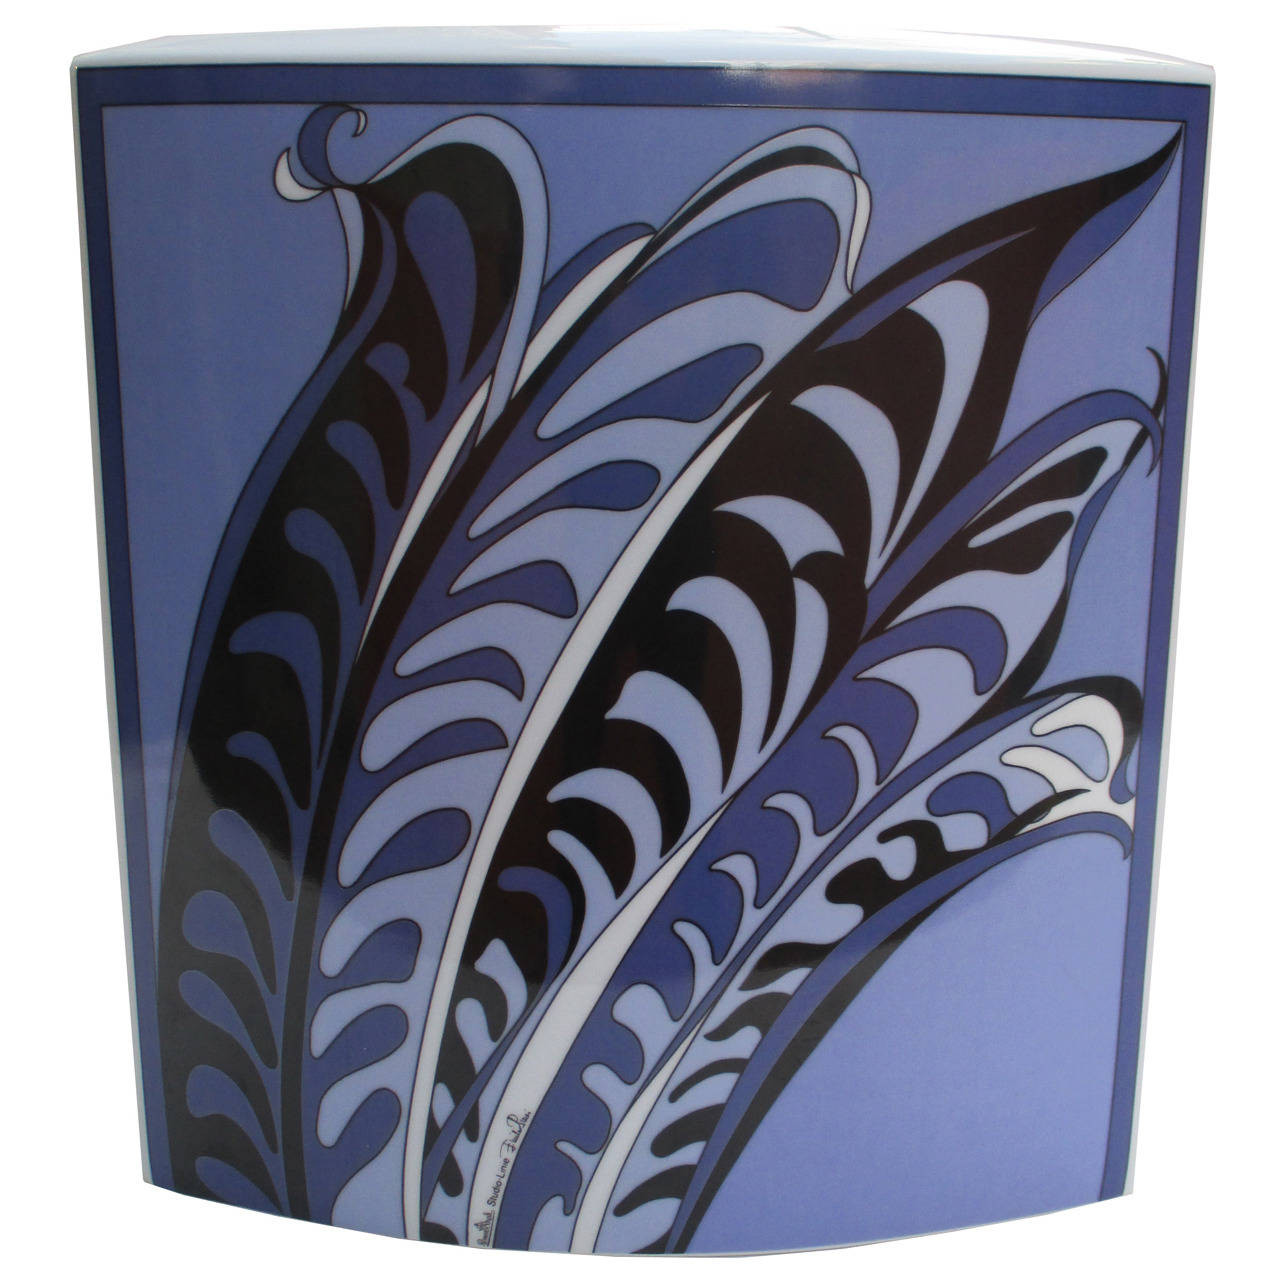 24 Popular Rosenthal Vases for Sale 2024 free download rosenthal vases for sale of large vase by emilio pucci for rosenthal for sale at 1stdibs within large vase by emilio pucci for rosenthal for sale